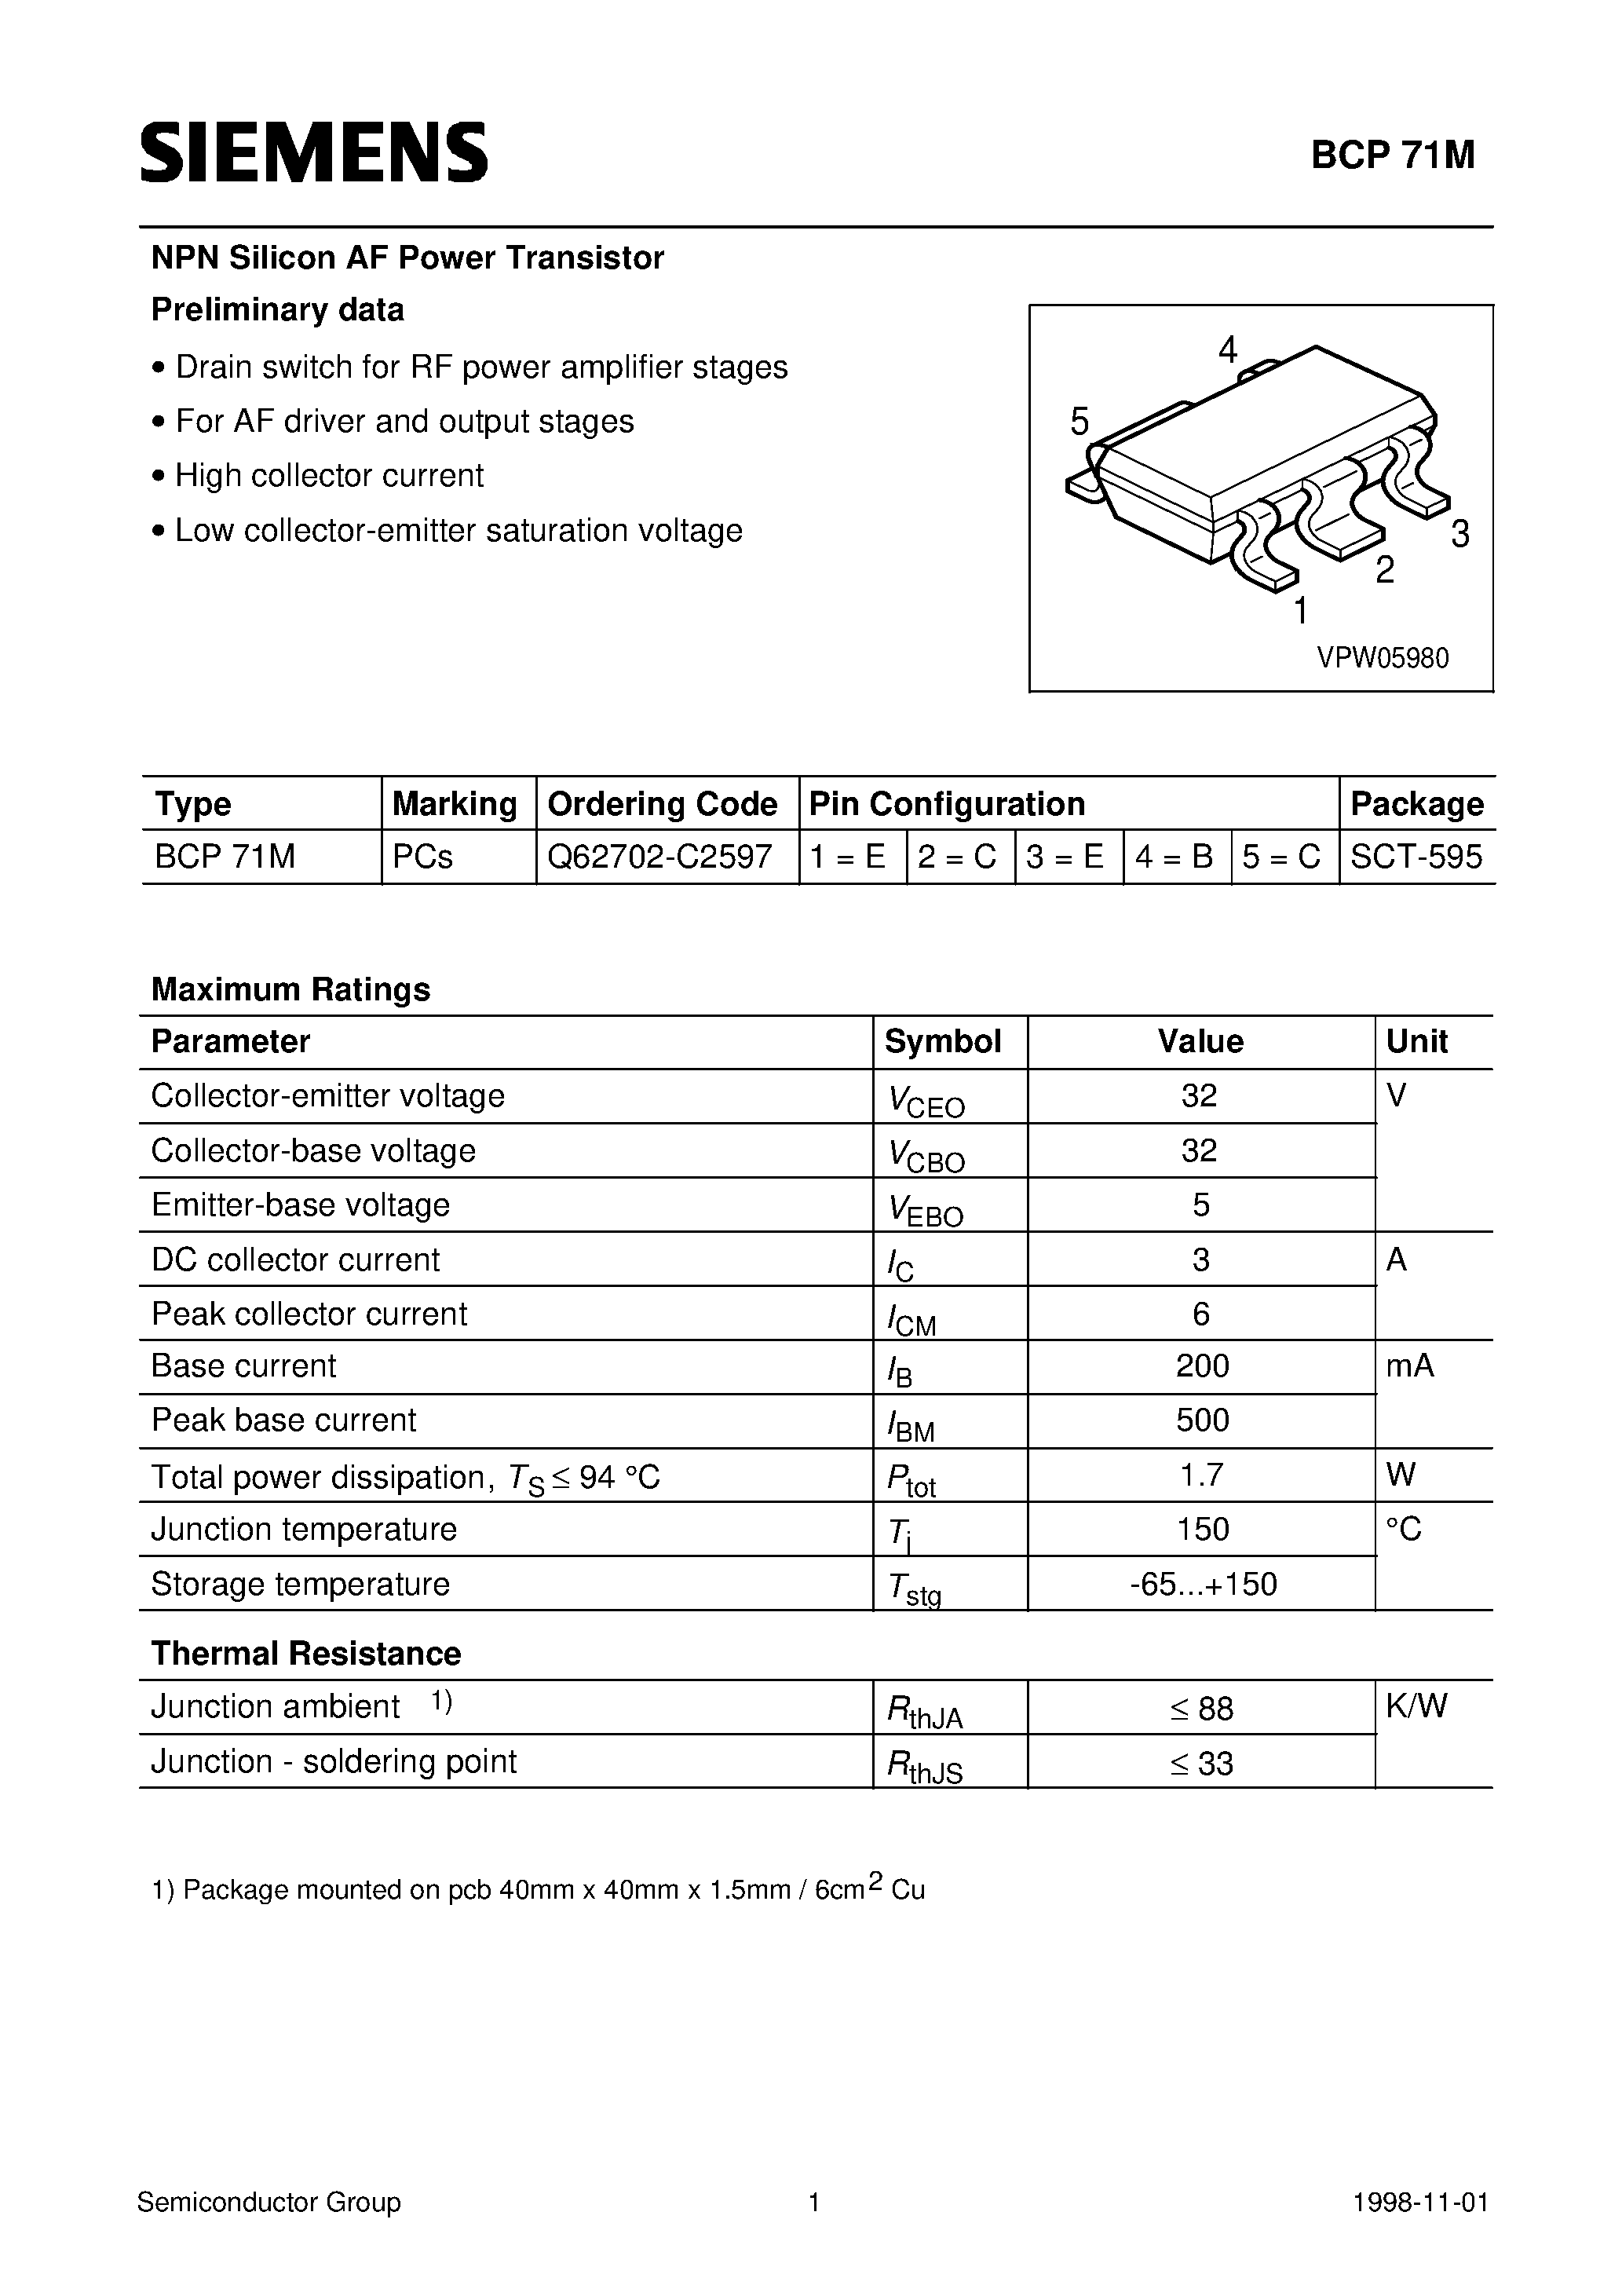 Datasheet BCP71M - NPN Silicon AF Power Transistor (Drain switch for RF power amplifier stages For AF driver and output stages High collector current) page 1